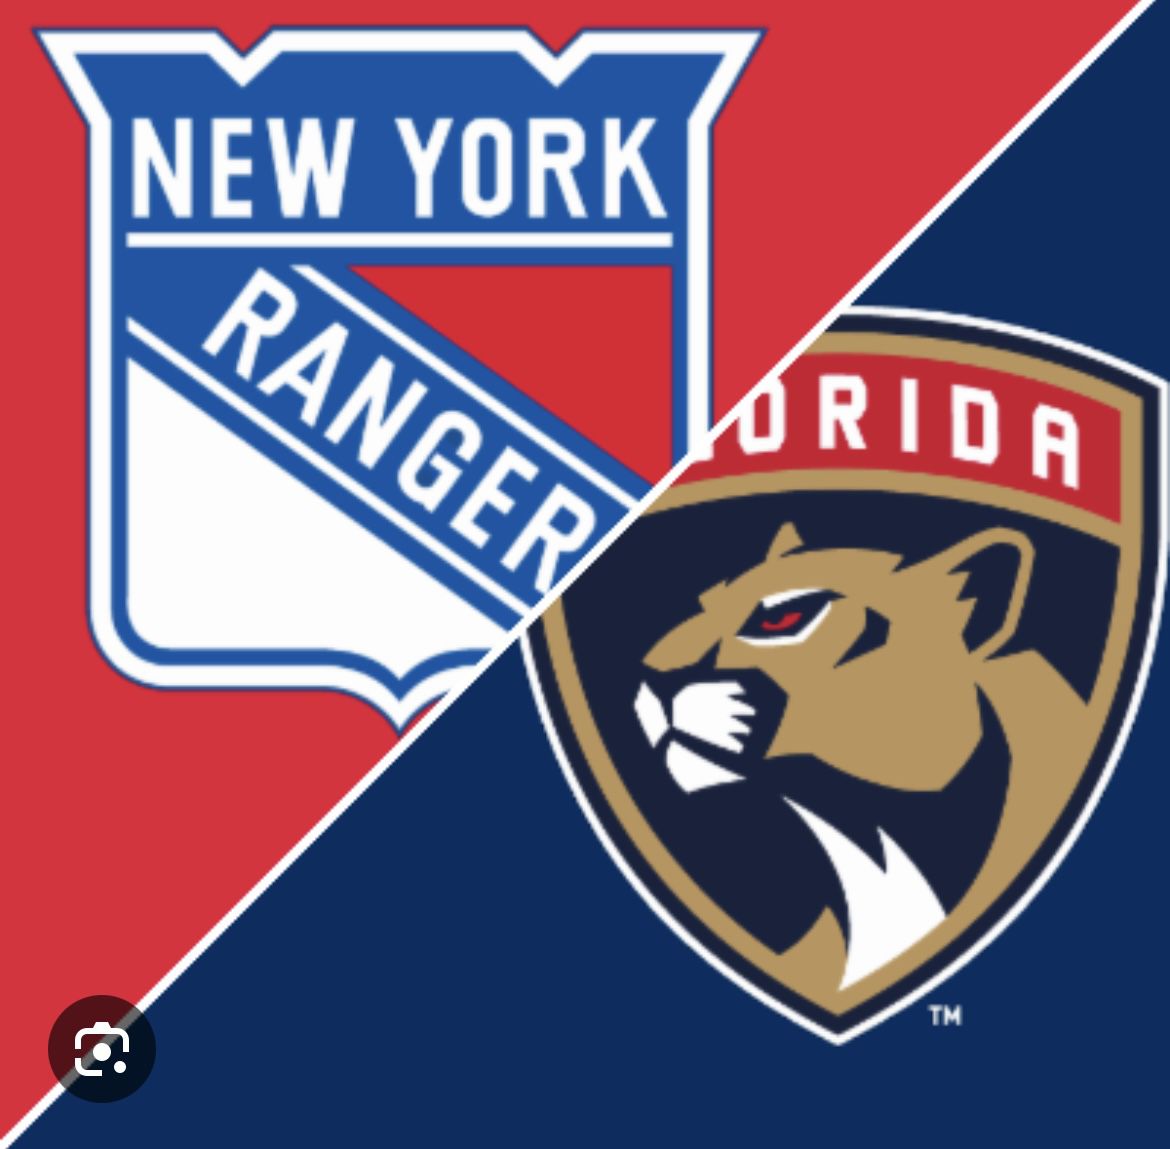 Florida Panthers v New York Rangers Home Game 2